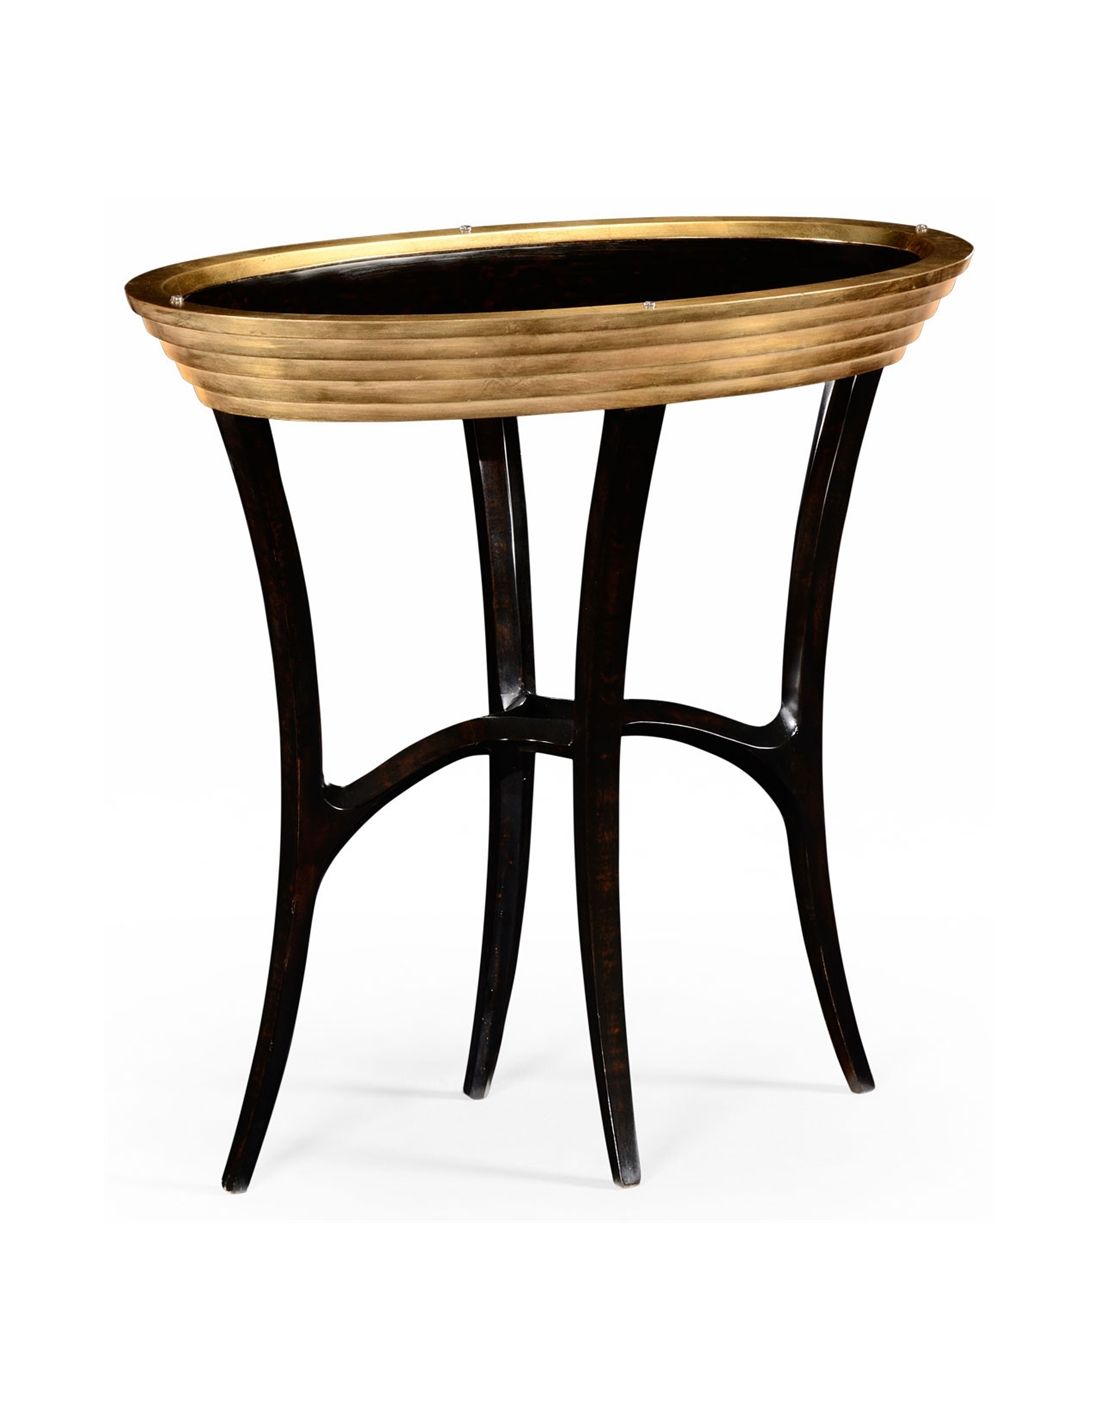 Oval black Lacquer and Gilt Side Table-54